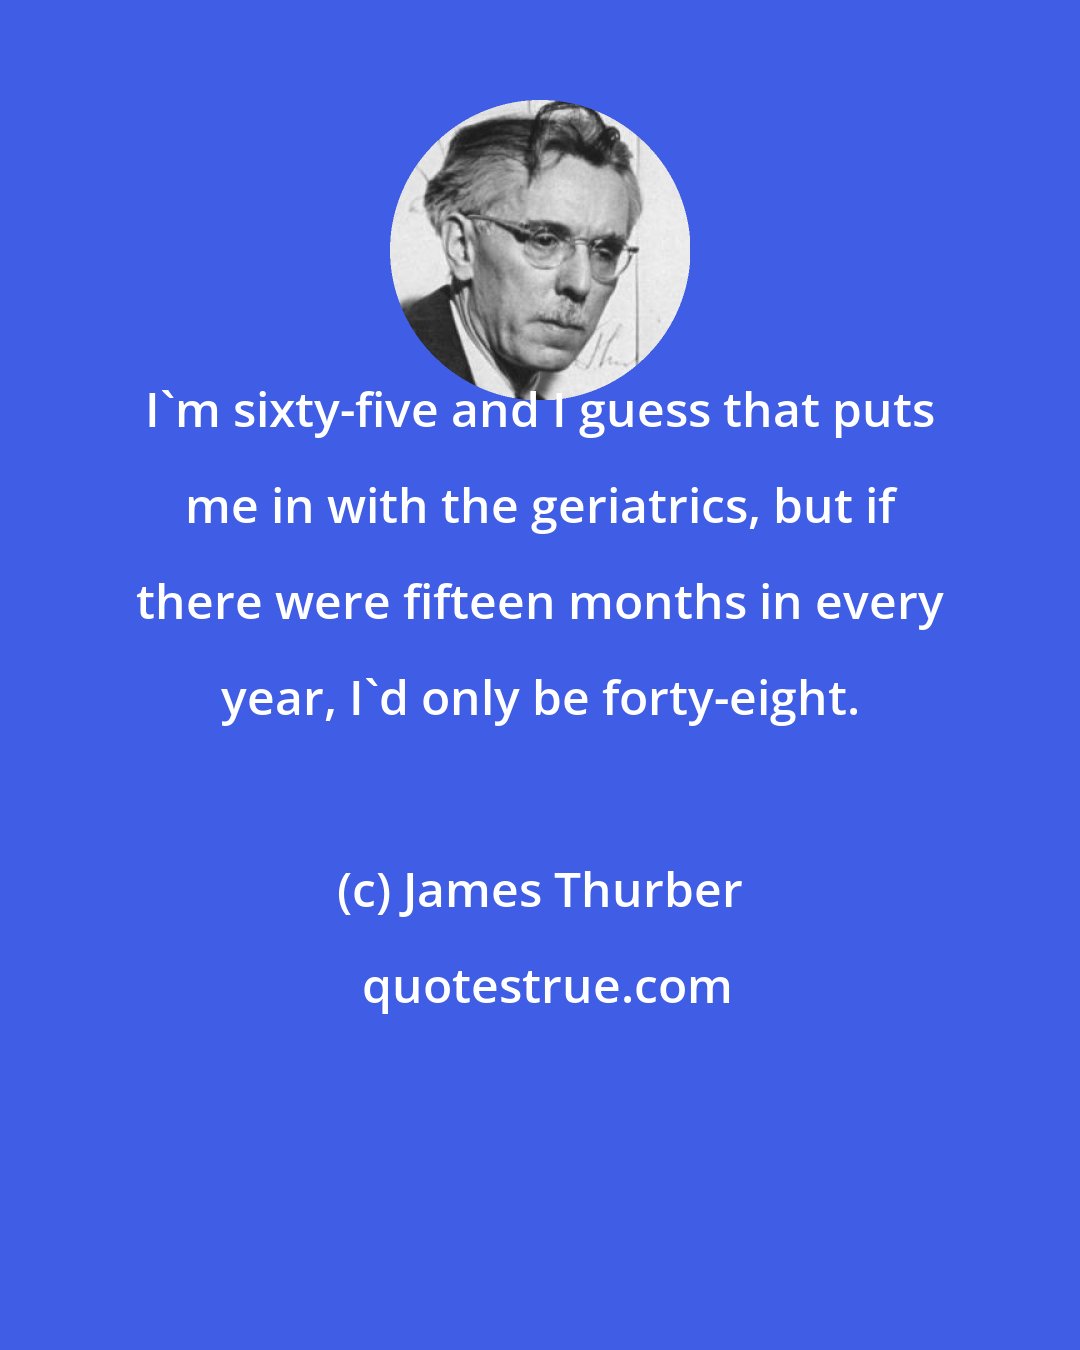 James Thurber: I'm sixty-five and I guess that puts me in with the geriatrics, but if there were fifteen months in every year, I'd only be forty-eight.